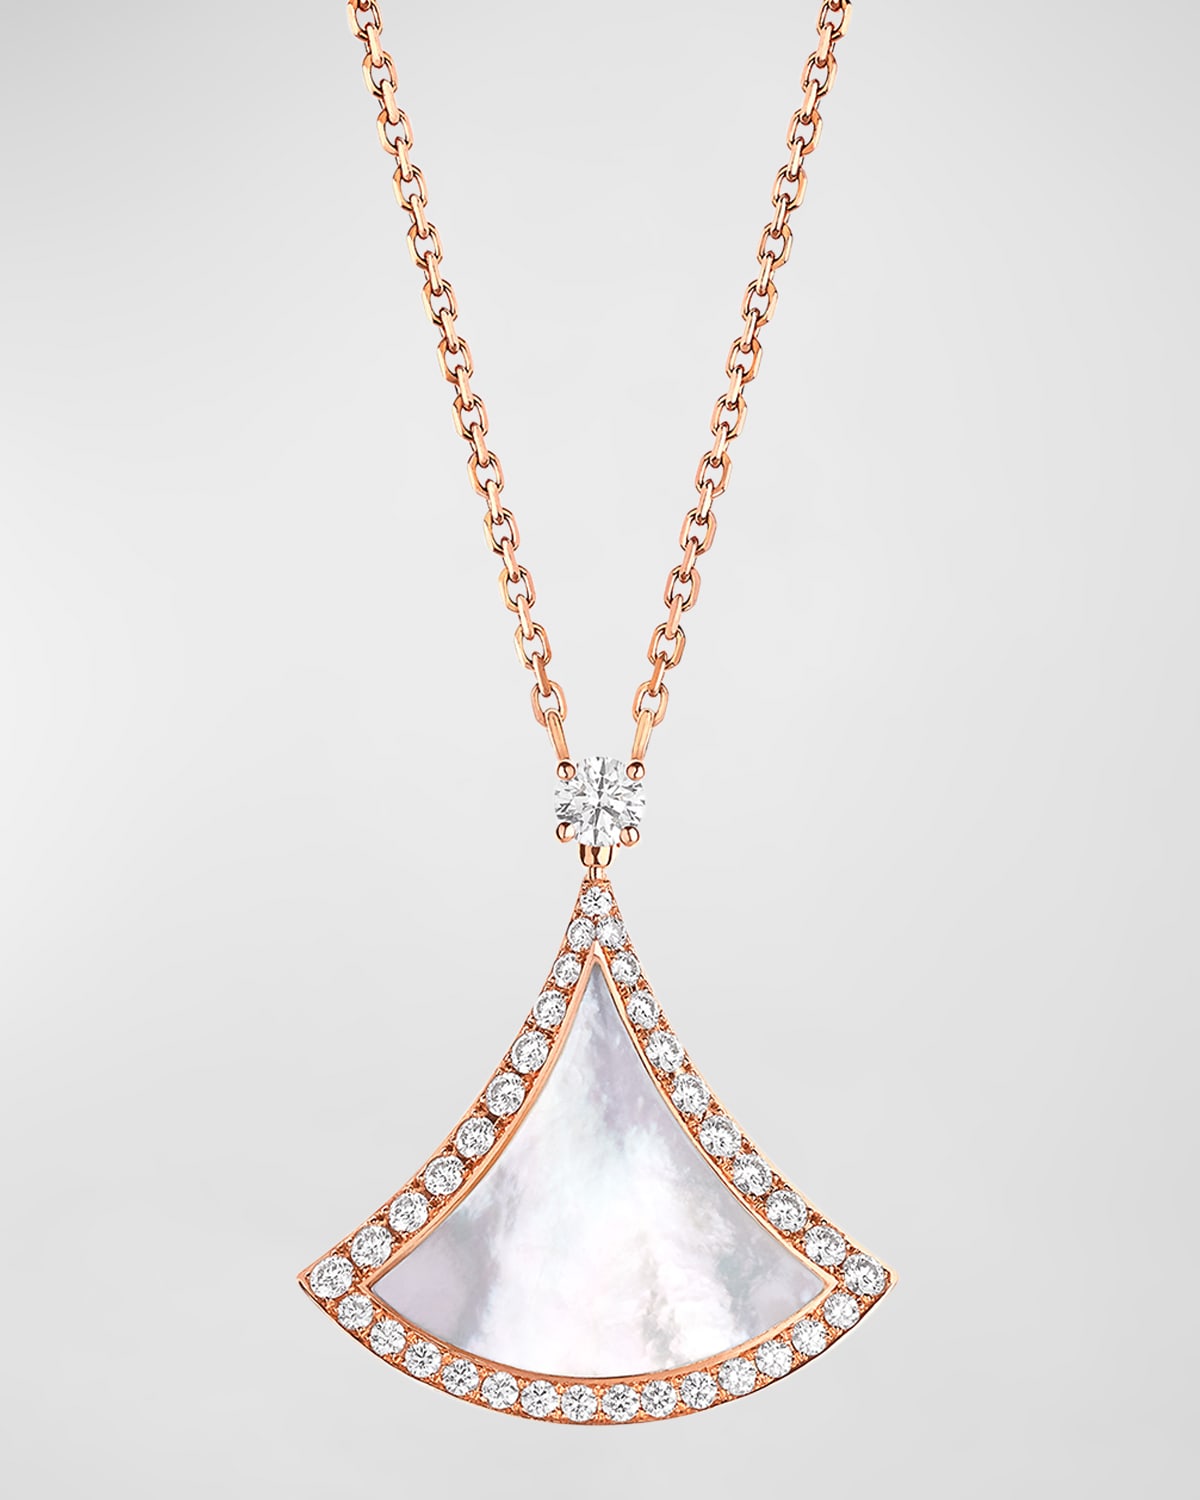 BVLGARI DIVAS' DREAM 18K ROSE GOLD MOTHER-OF-PEARL AND PAVE DIAMOND PENDANT NECKLACE